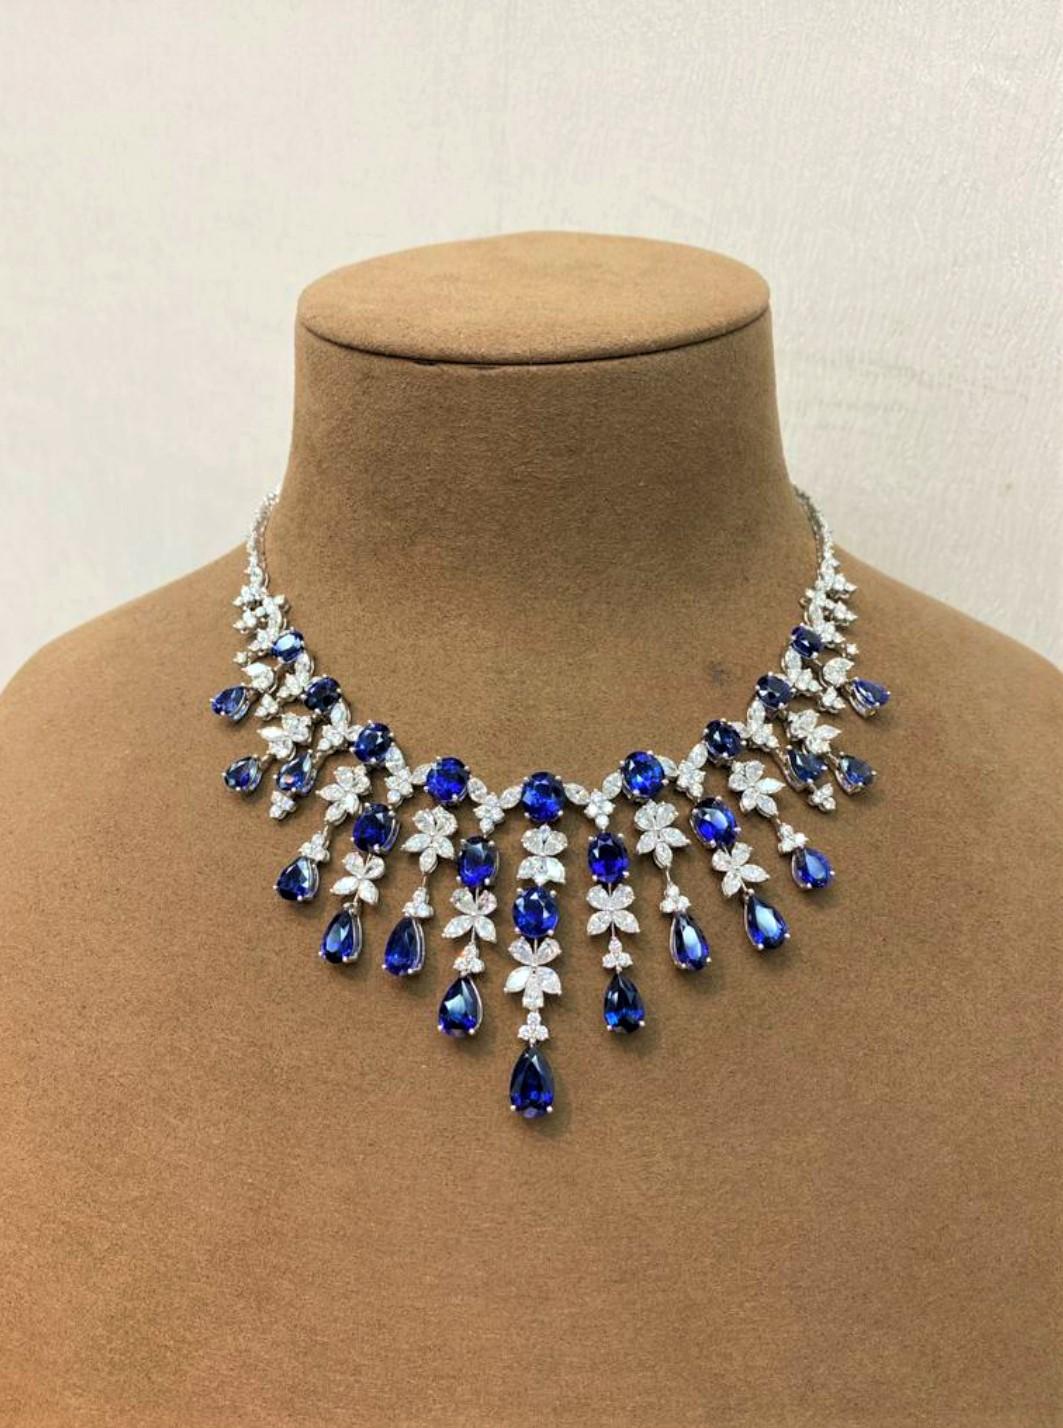 The Following Item we are offering is this Rare Important Radiant 18KT Gold Gorgeous Glittering and Sparkling Magnificent Fancy Natural Sapphires and Diamond Fringe Necklace. Necklace contains approx 70CTS of Beautiful Fancy Natural Sapphires and